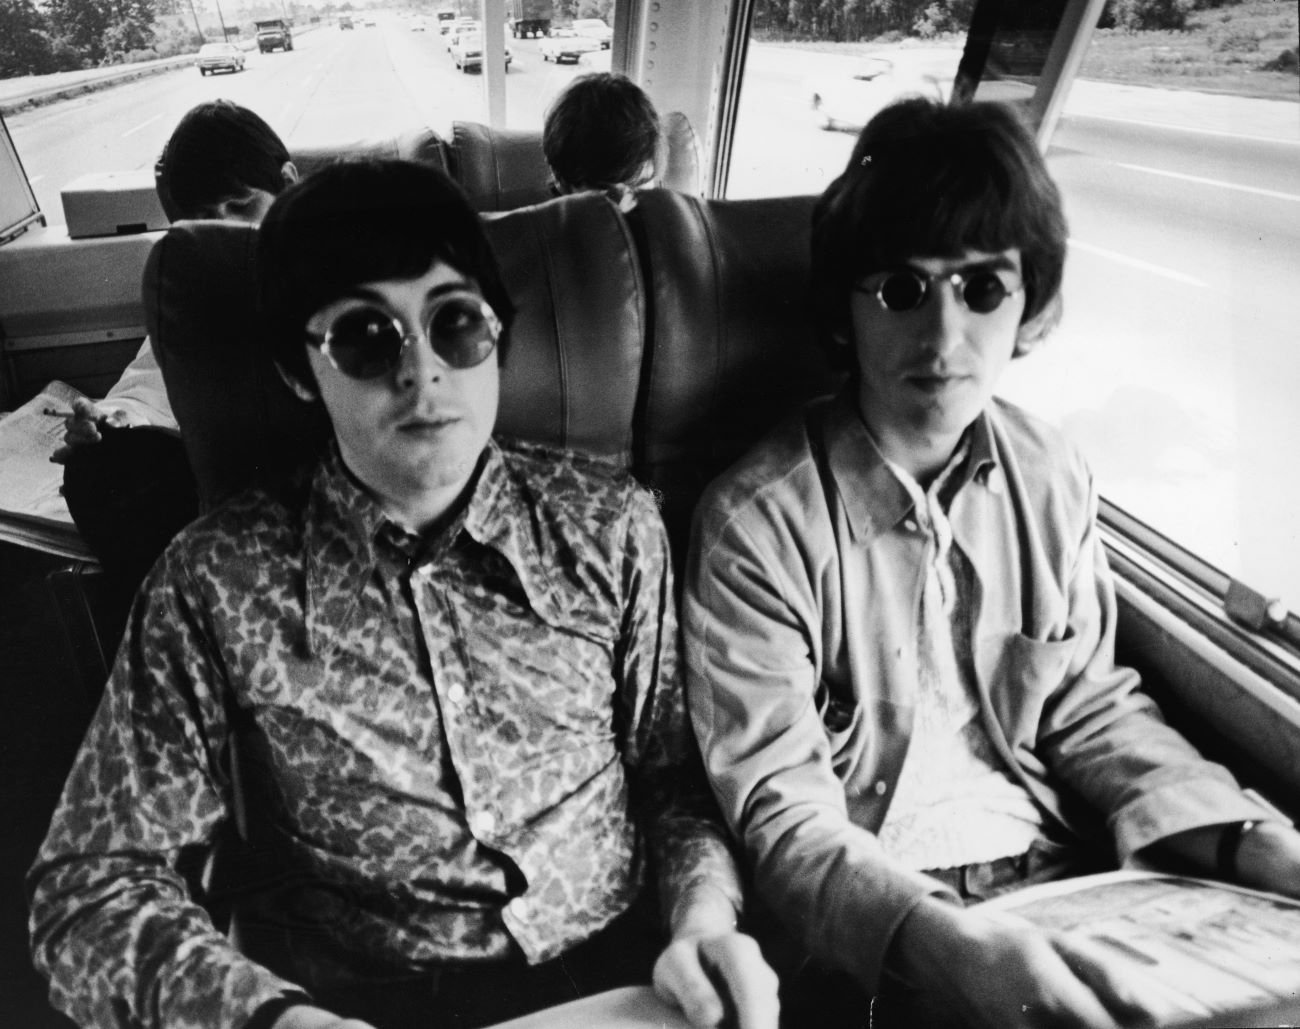 A black and white picture of Paul McCartney and George Harrison sitting together on a bus.